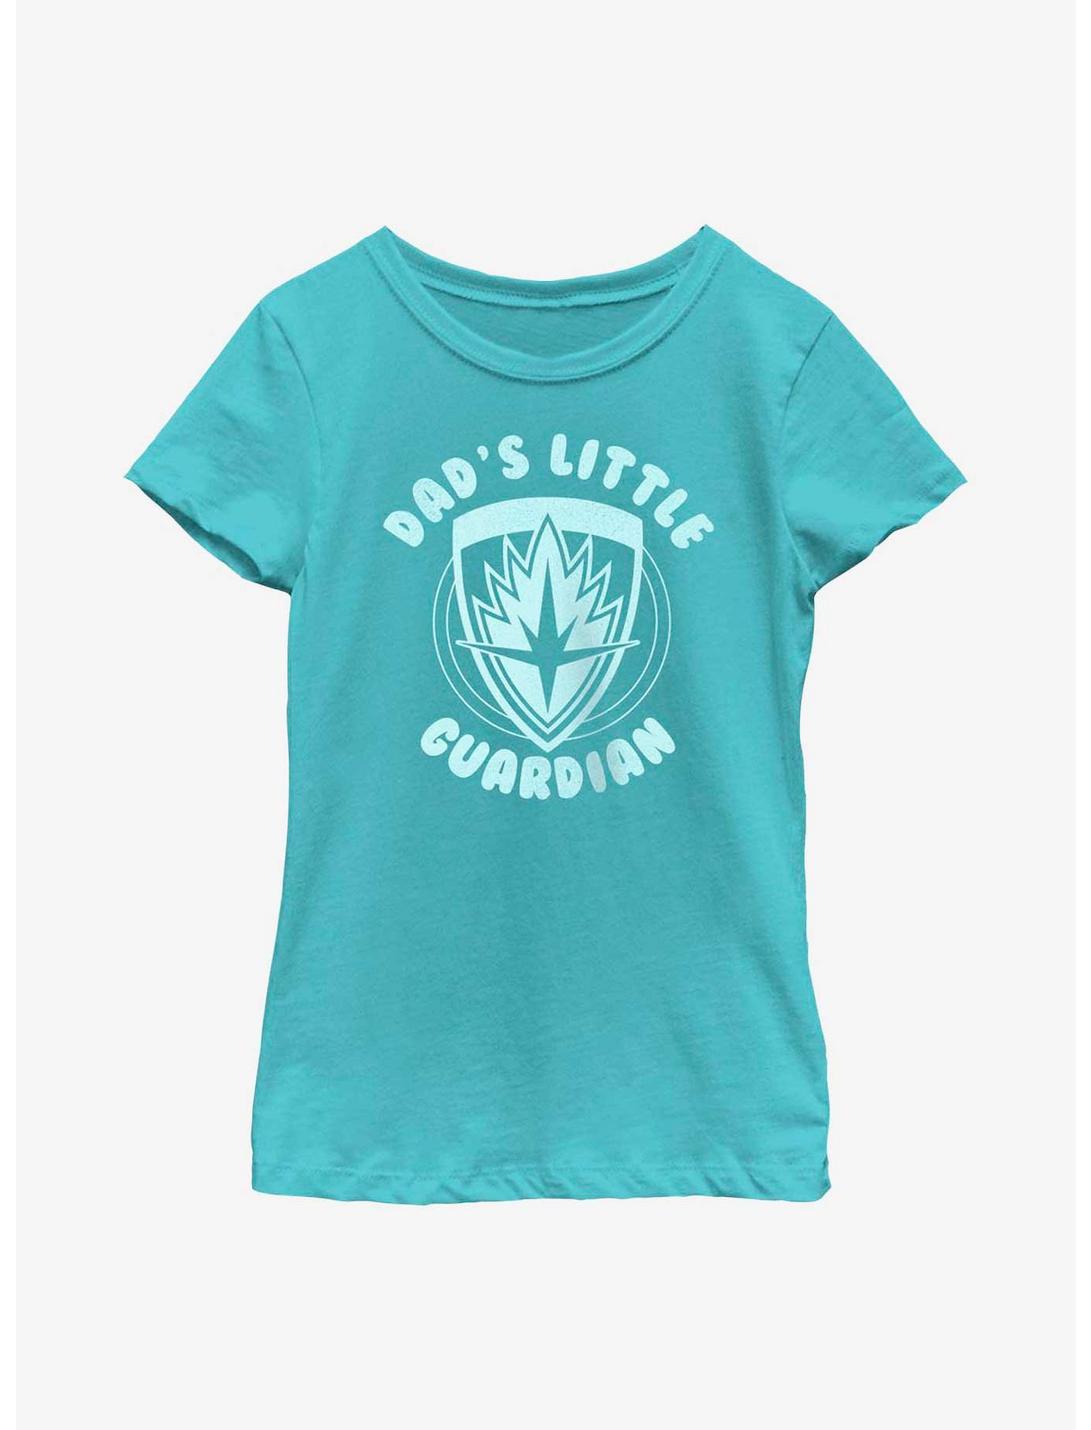 Marvel Guardians of the Galaxy Dad'S Little Guardian Youth Girls T-Shirt, TAHI BLUE, hi-res